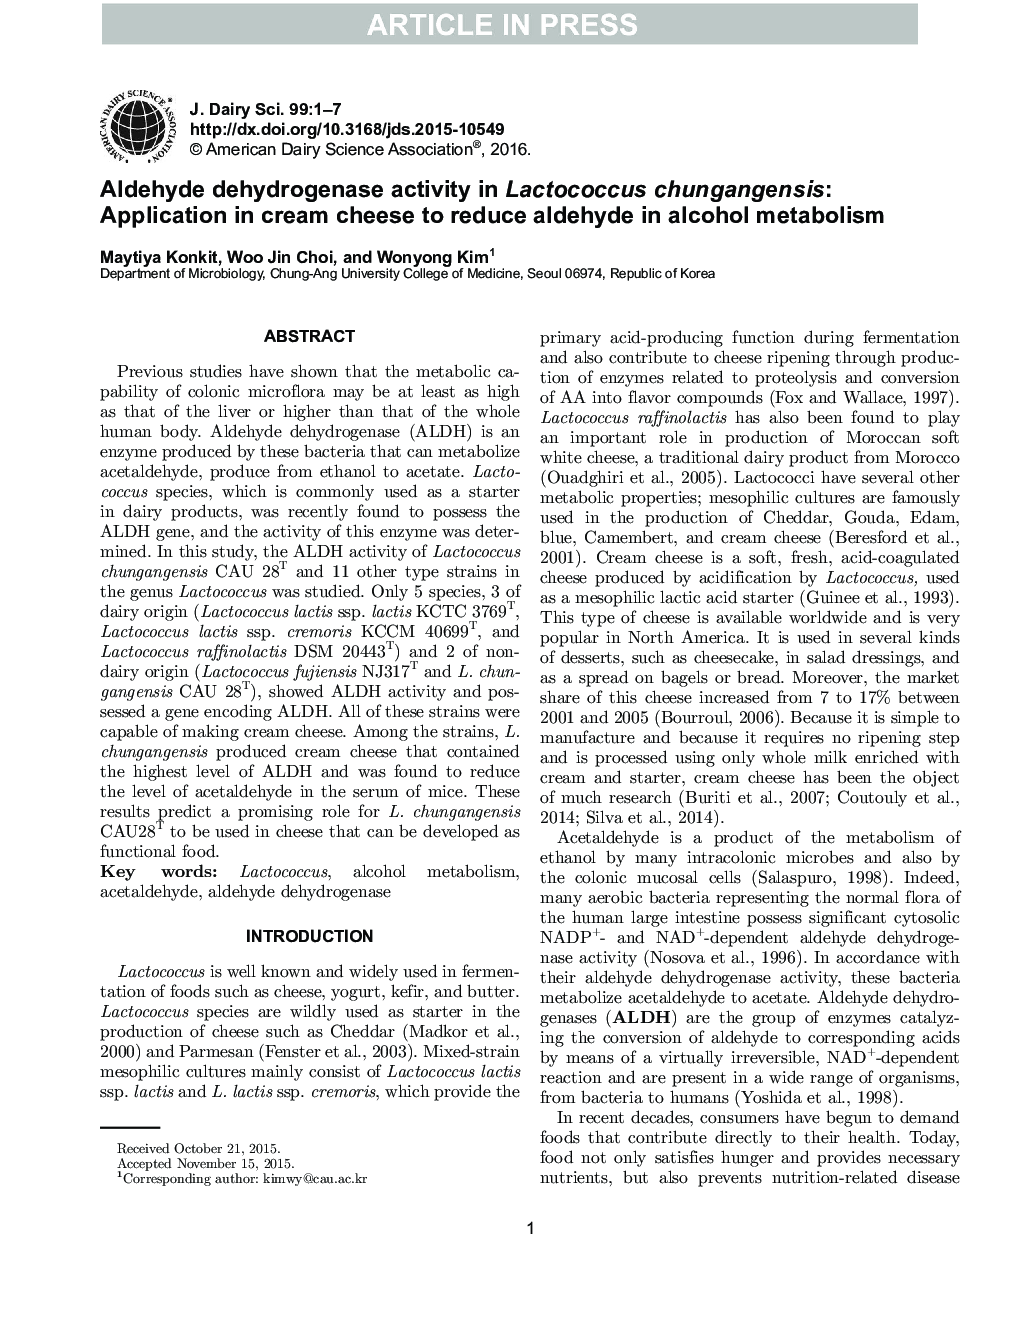 Aldehyde dehydrogenase activity in Lactococcus chungangensis: Application in cream cheese to reduce aldehyde in alcohol metabolism